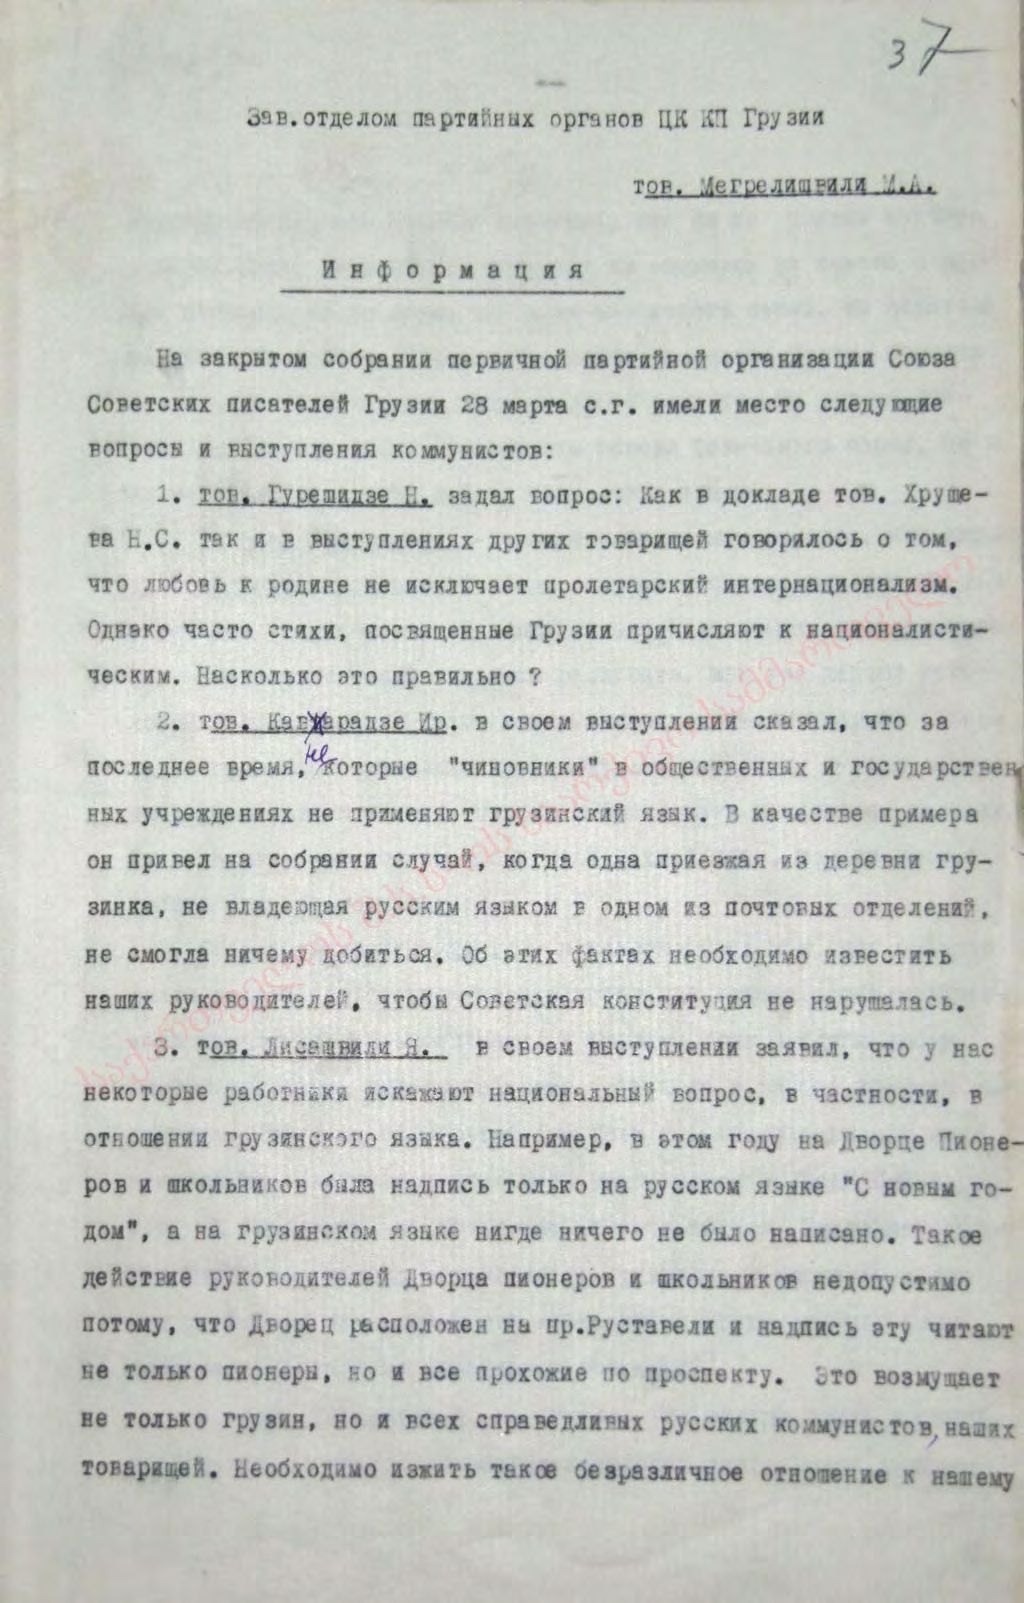 Opinions and questions that were asked and expressed during the discussion at the closed meeting of the Union of the Soviet Writers of Georgia on March 28th 1956.